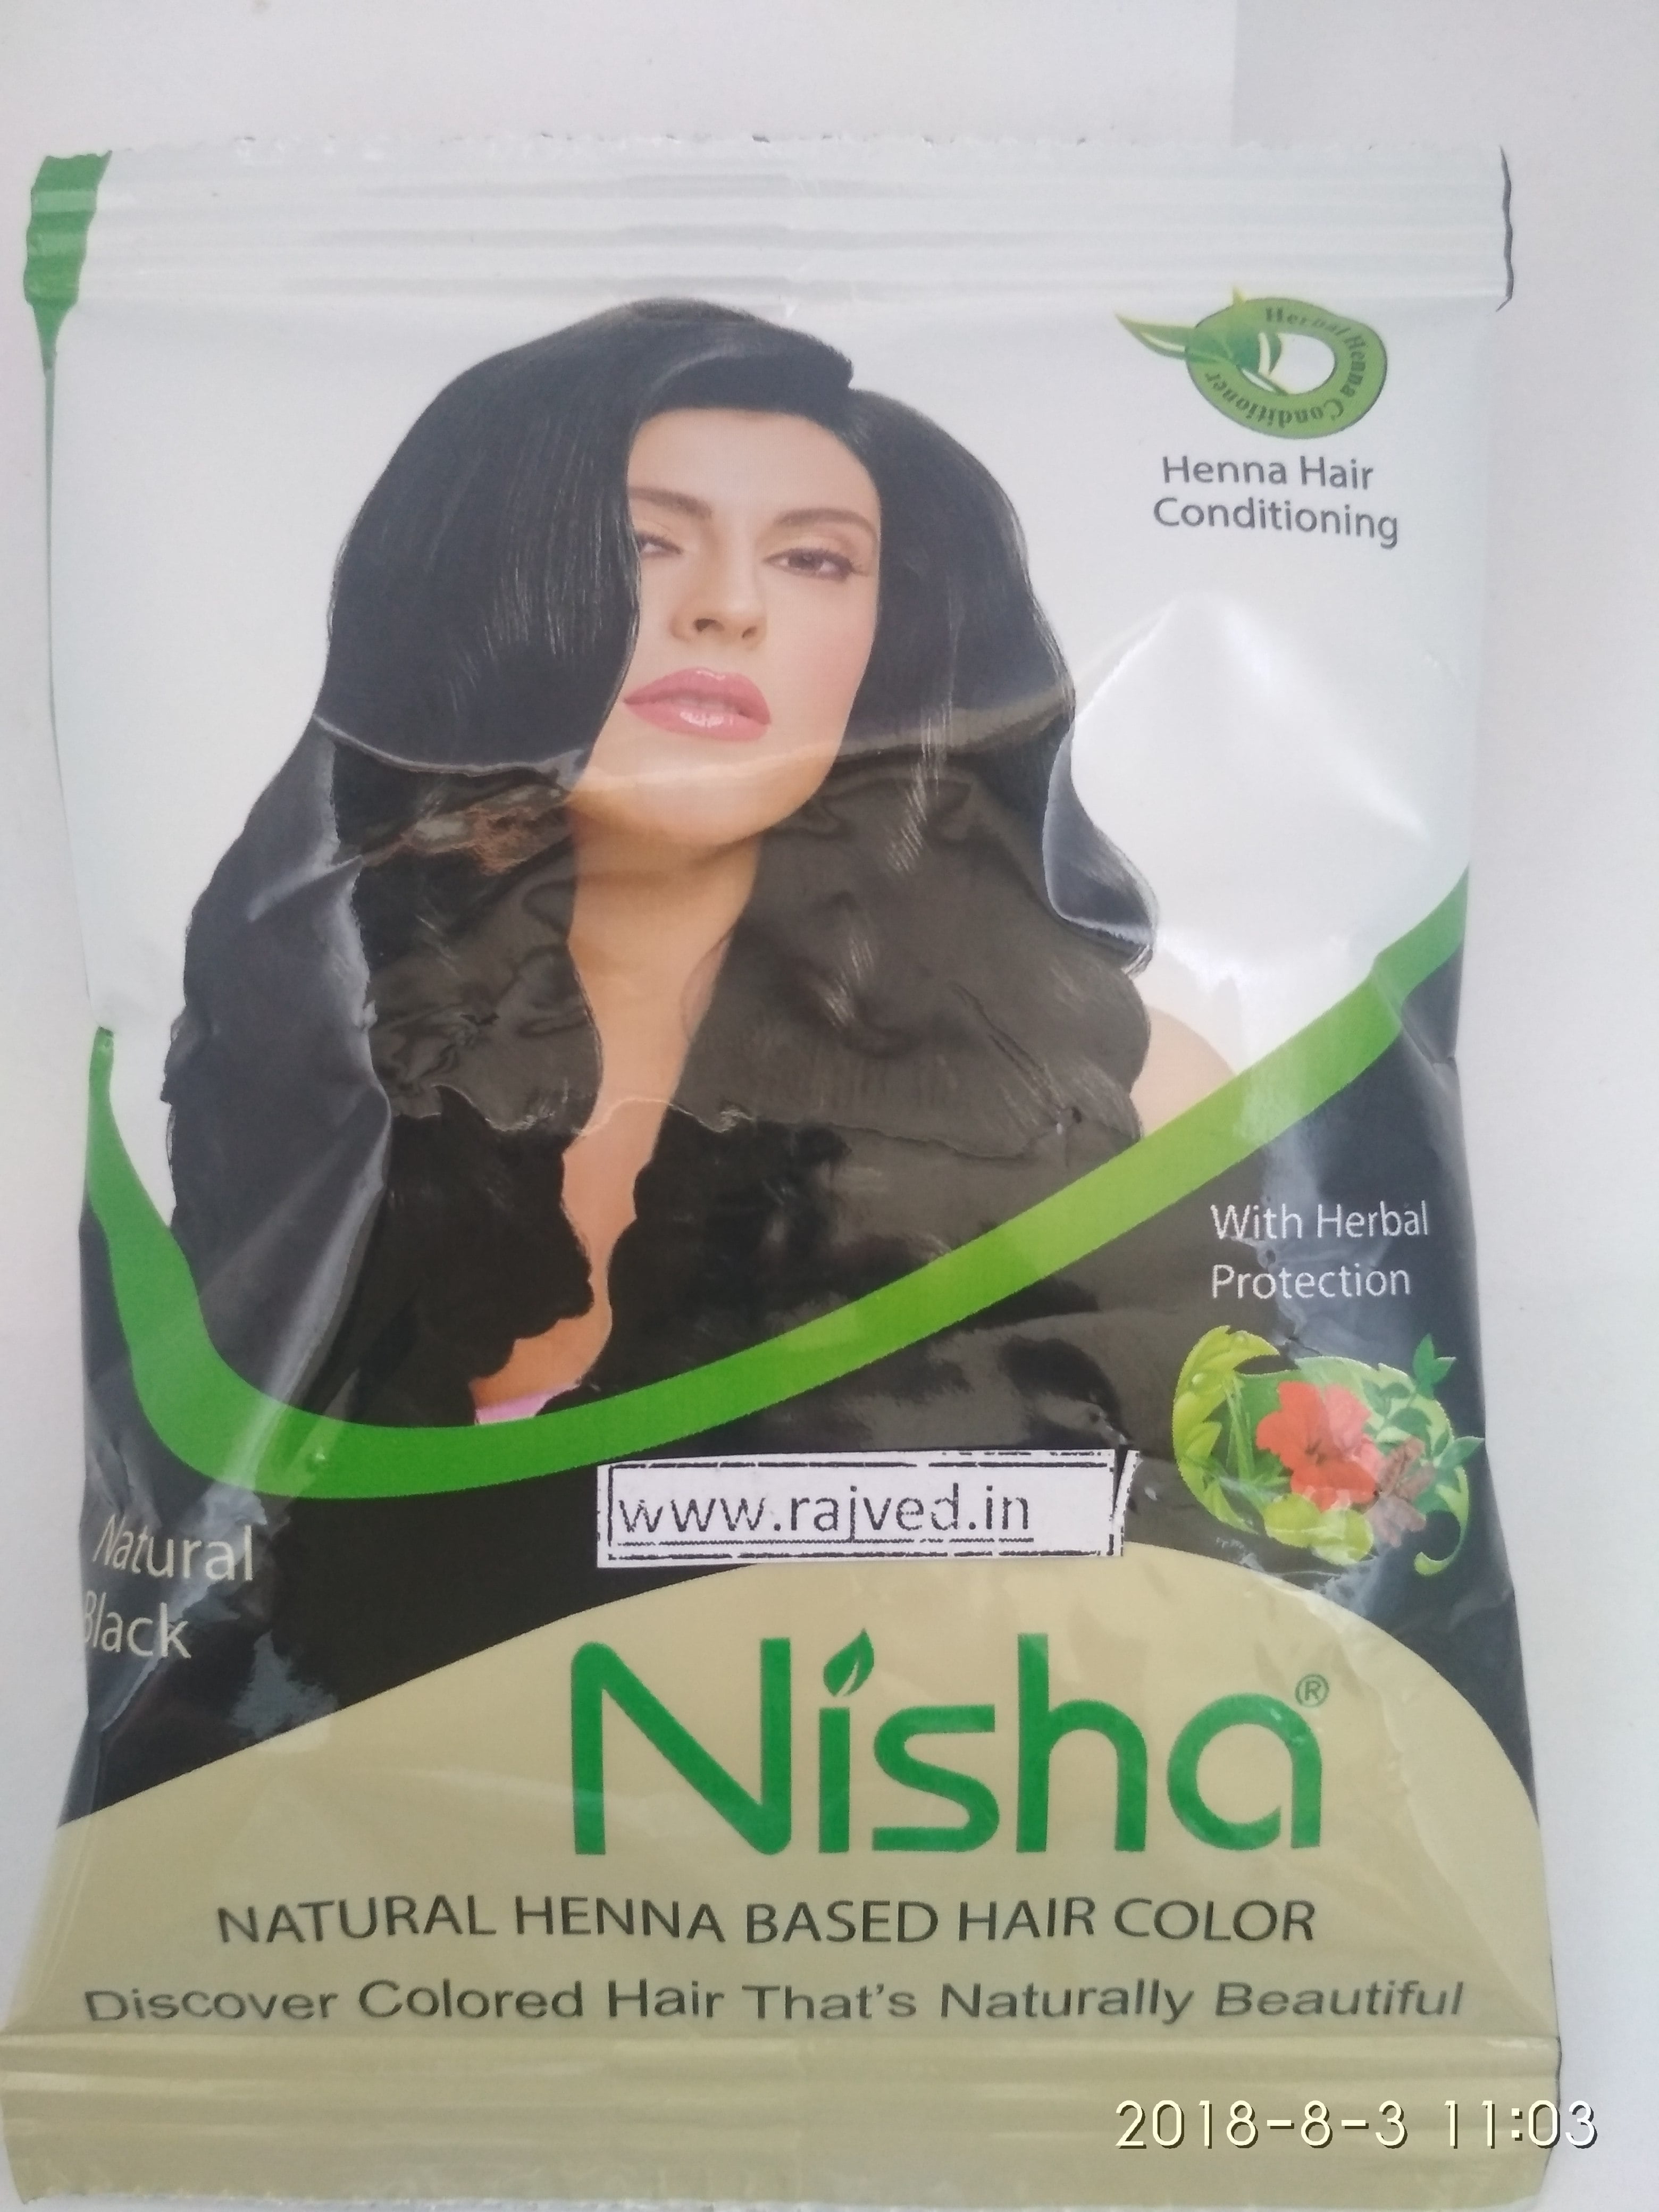 HENNA HAIR COLOR 30 Minute Enriched with Herbs Semi Permanent Powder   Harsh Chemical Free Black Hair Dye for Men and Women Natural Black